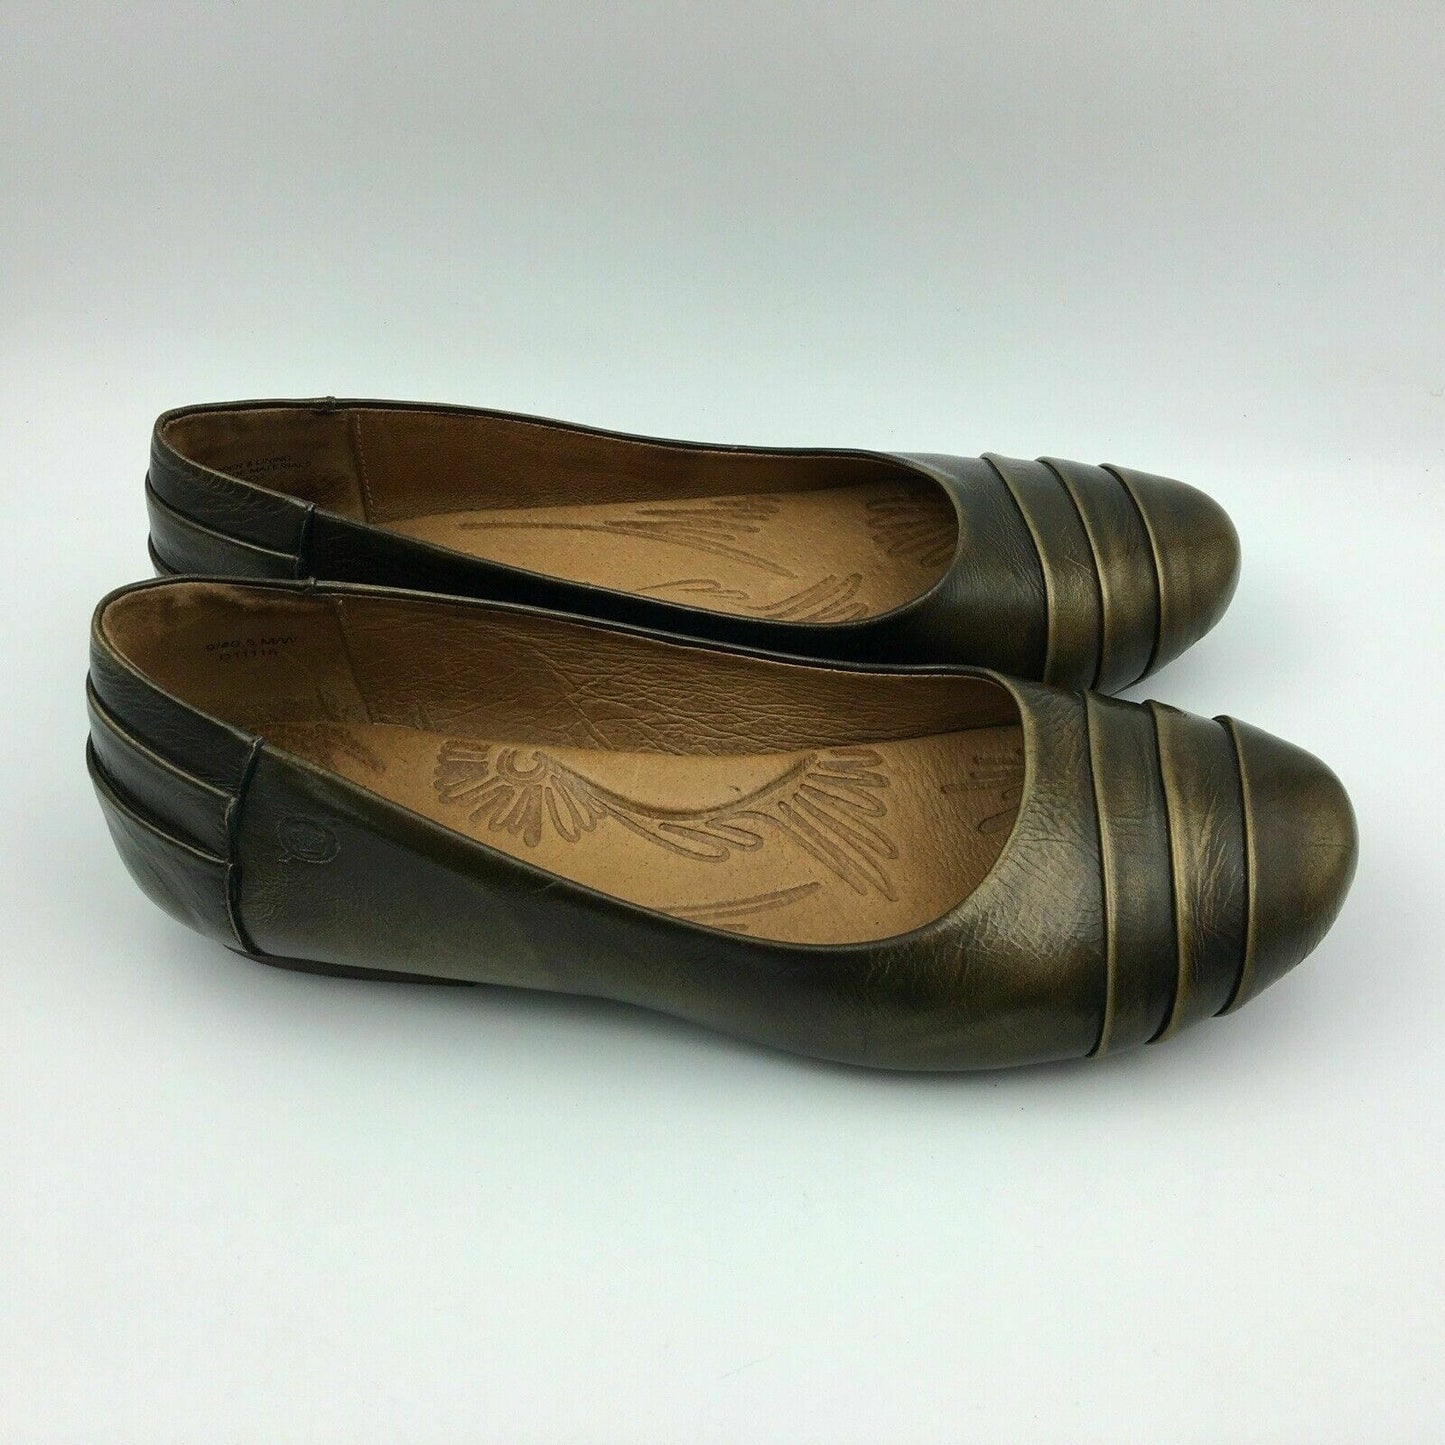 Chic Born Womens Leather Flats Shoes - Gold, Size 5M